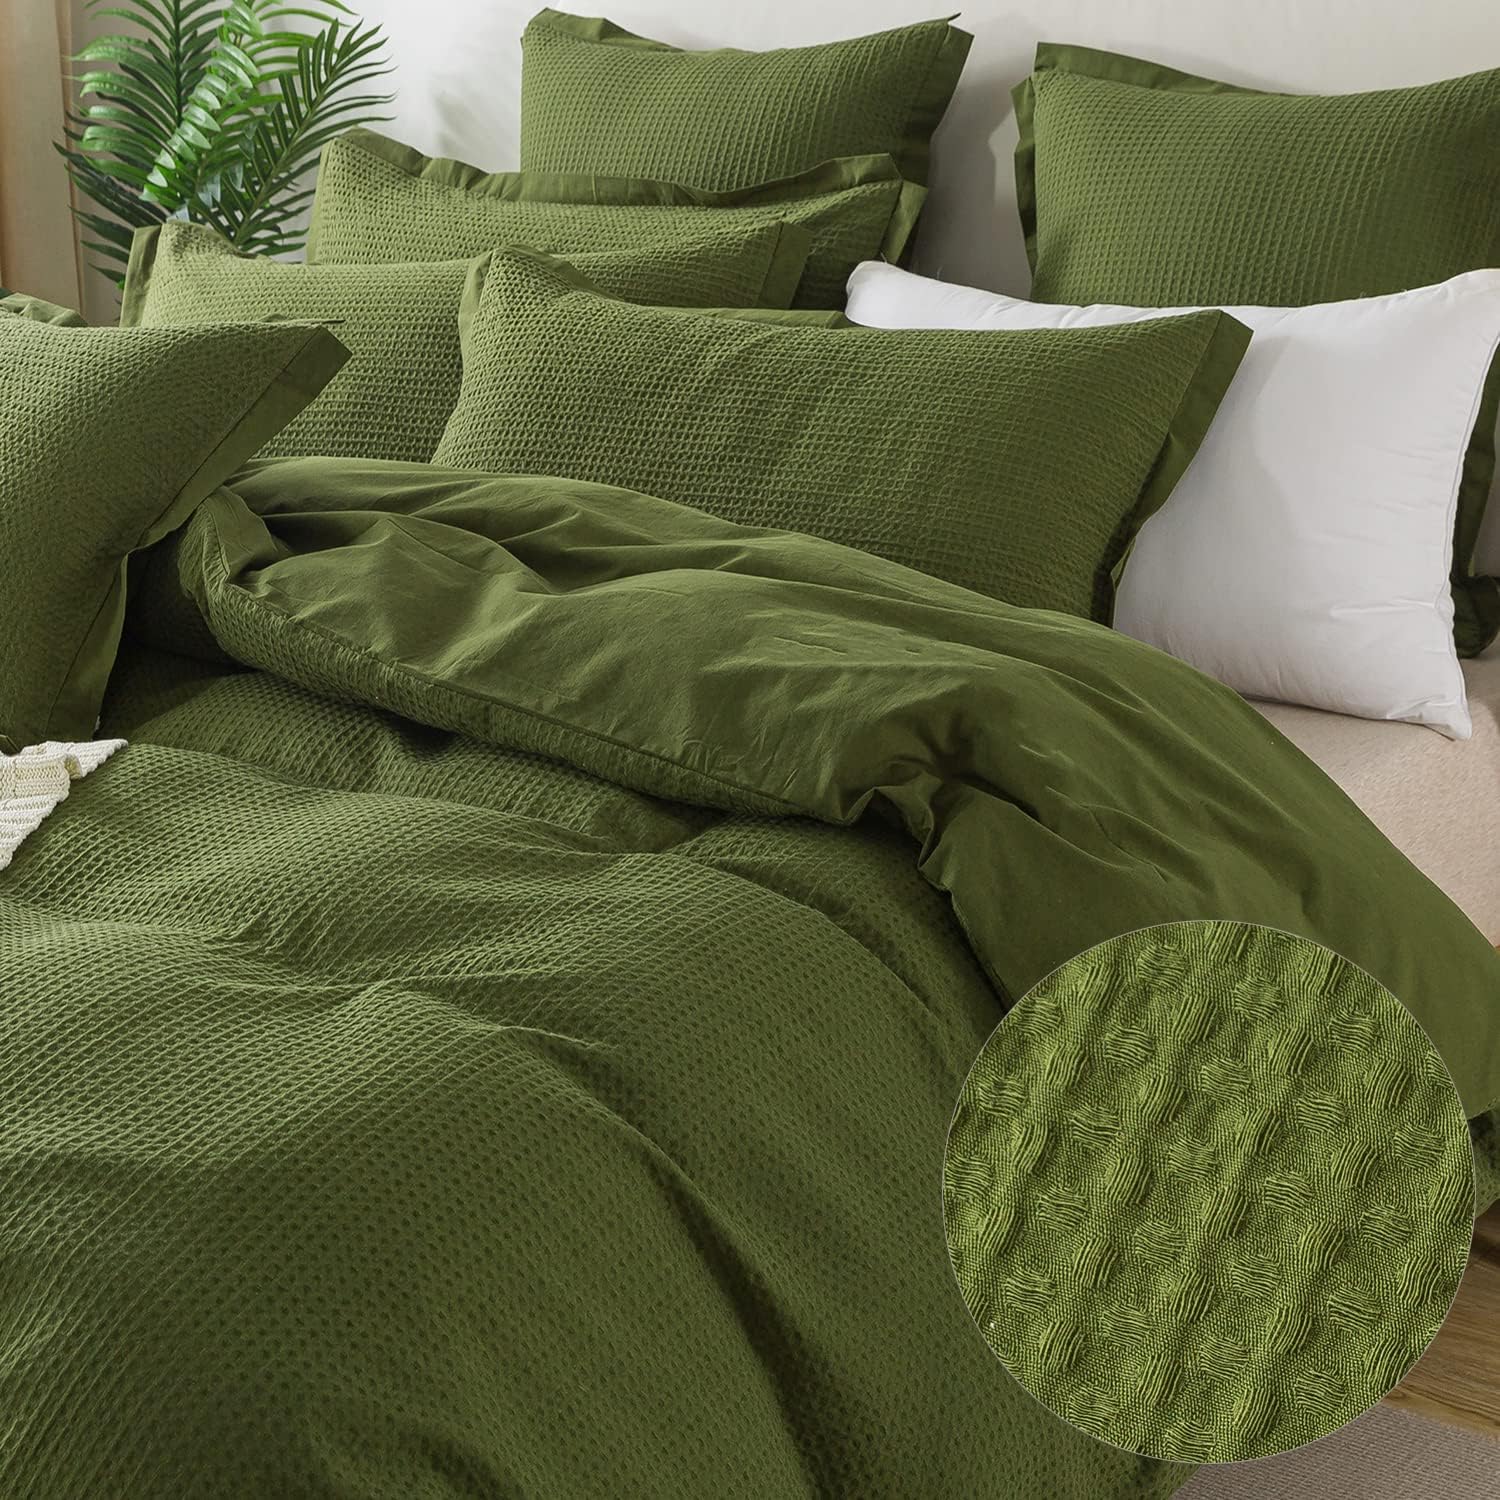 FADFAY Dark Green Duvet Cover Set Queen Size Waffle Weave Knit Reversible 100% Washed Cotton Sage Green Textured Duvet Covers Boho Comforter Cover Farmhouse Bedding Soft Breathable for All Season